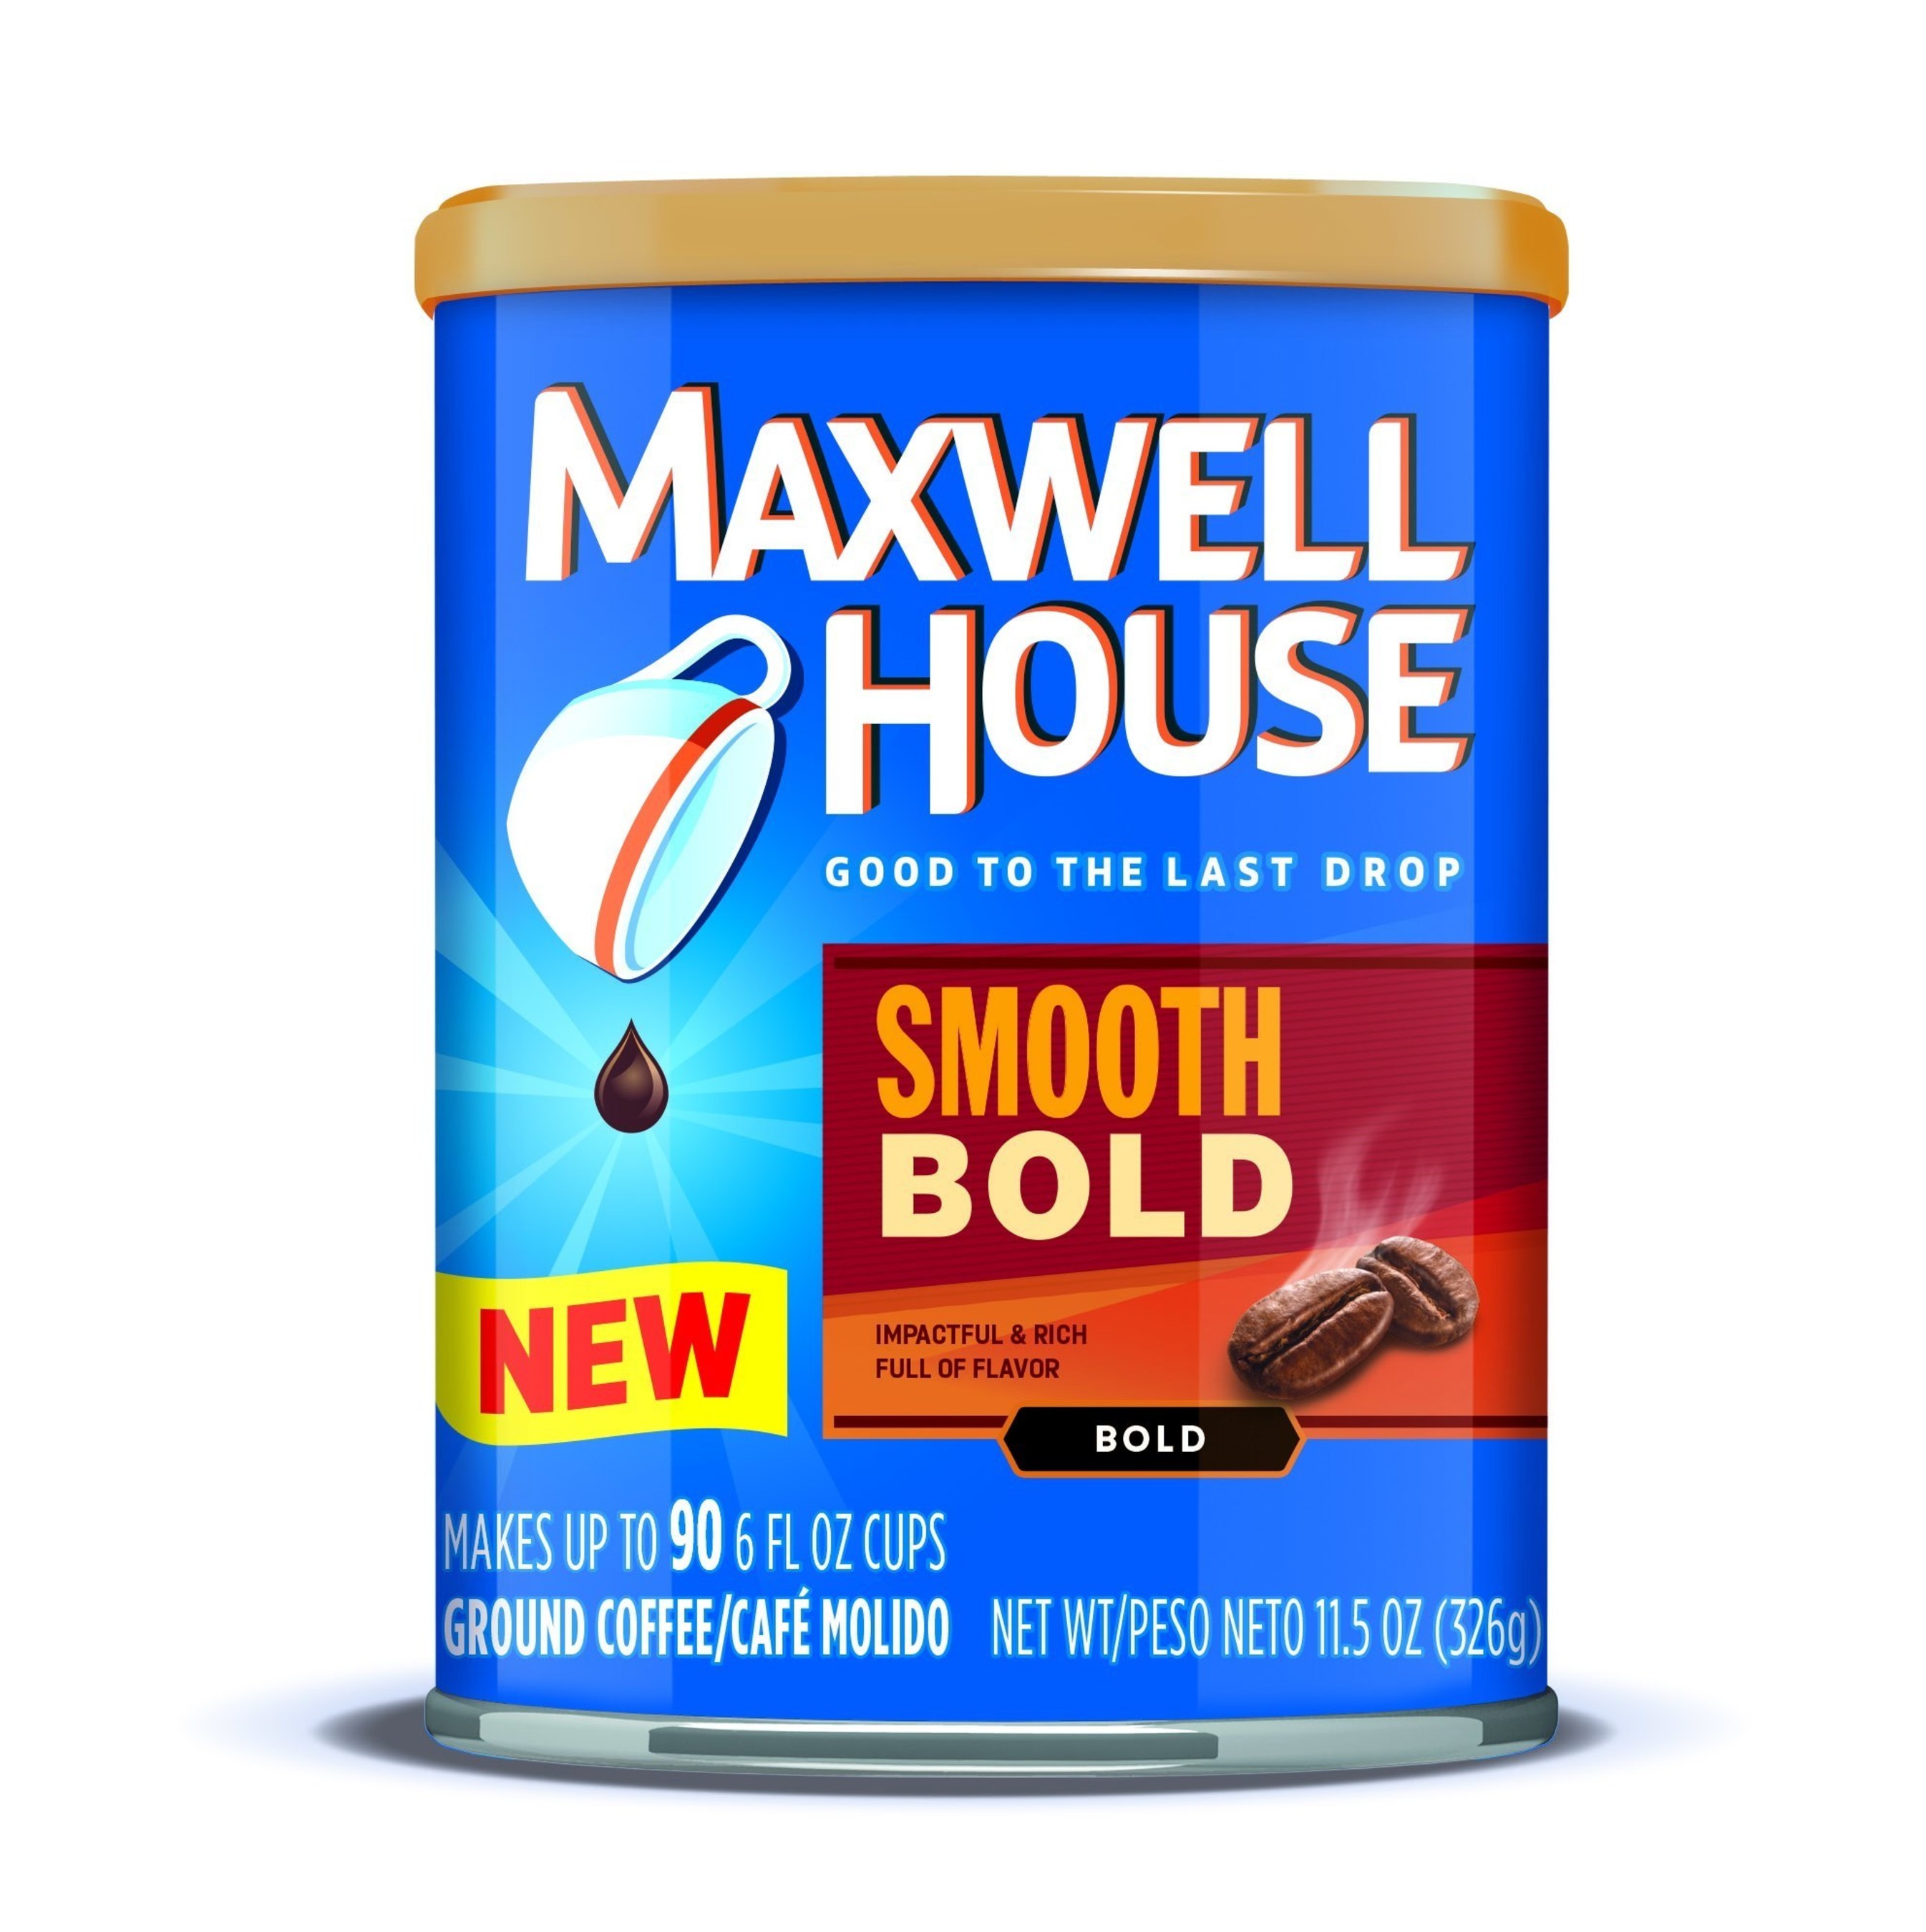 New Maxwell House Smooth Bold offers a deep and extra dark flavor. (PRNewsFoto/Maxwell House)